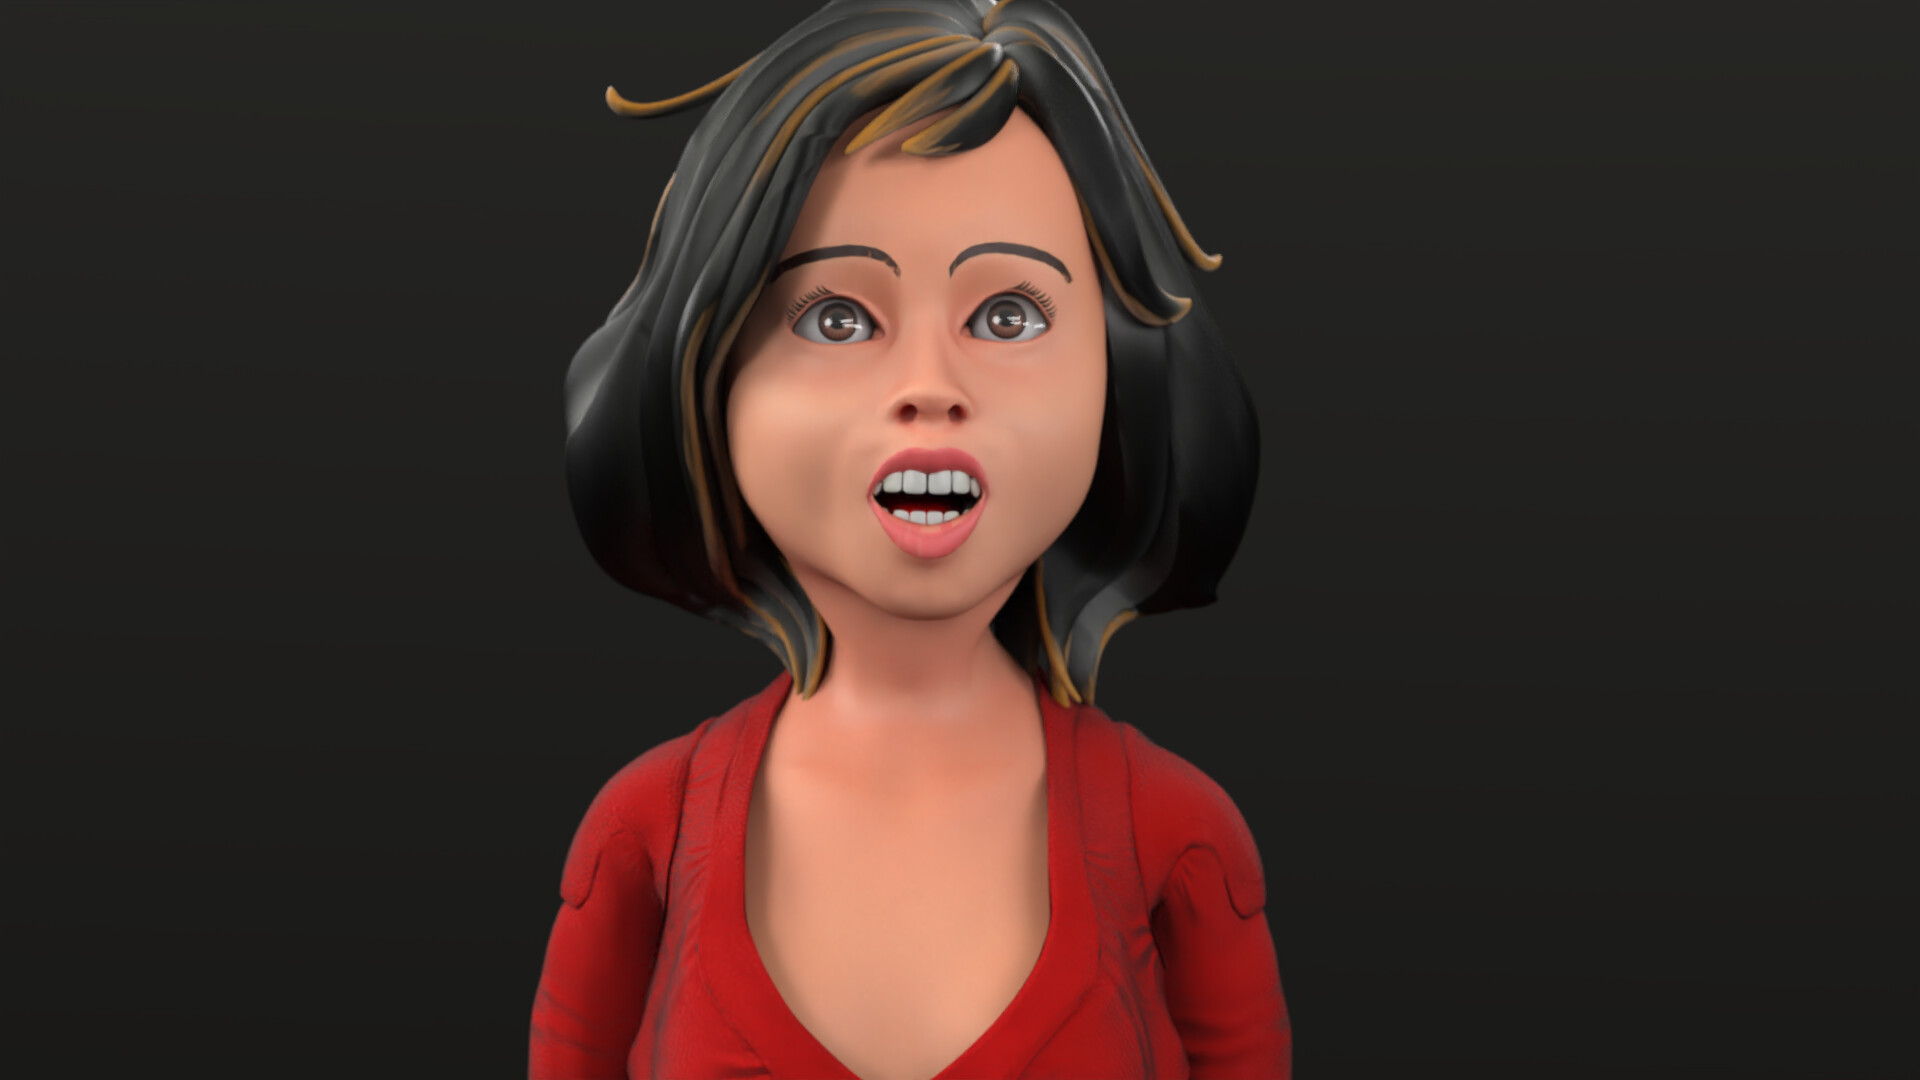 ArtStation - 3D Cartoon Character for Animation or video games with  cimematic look